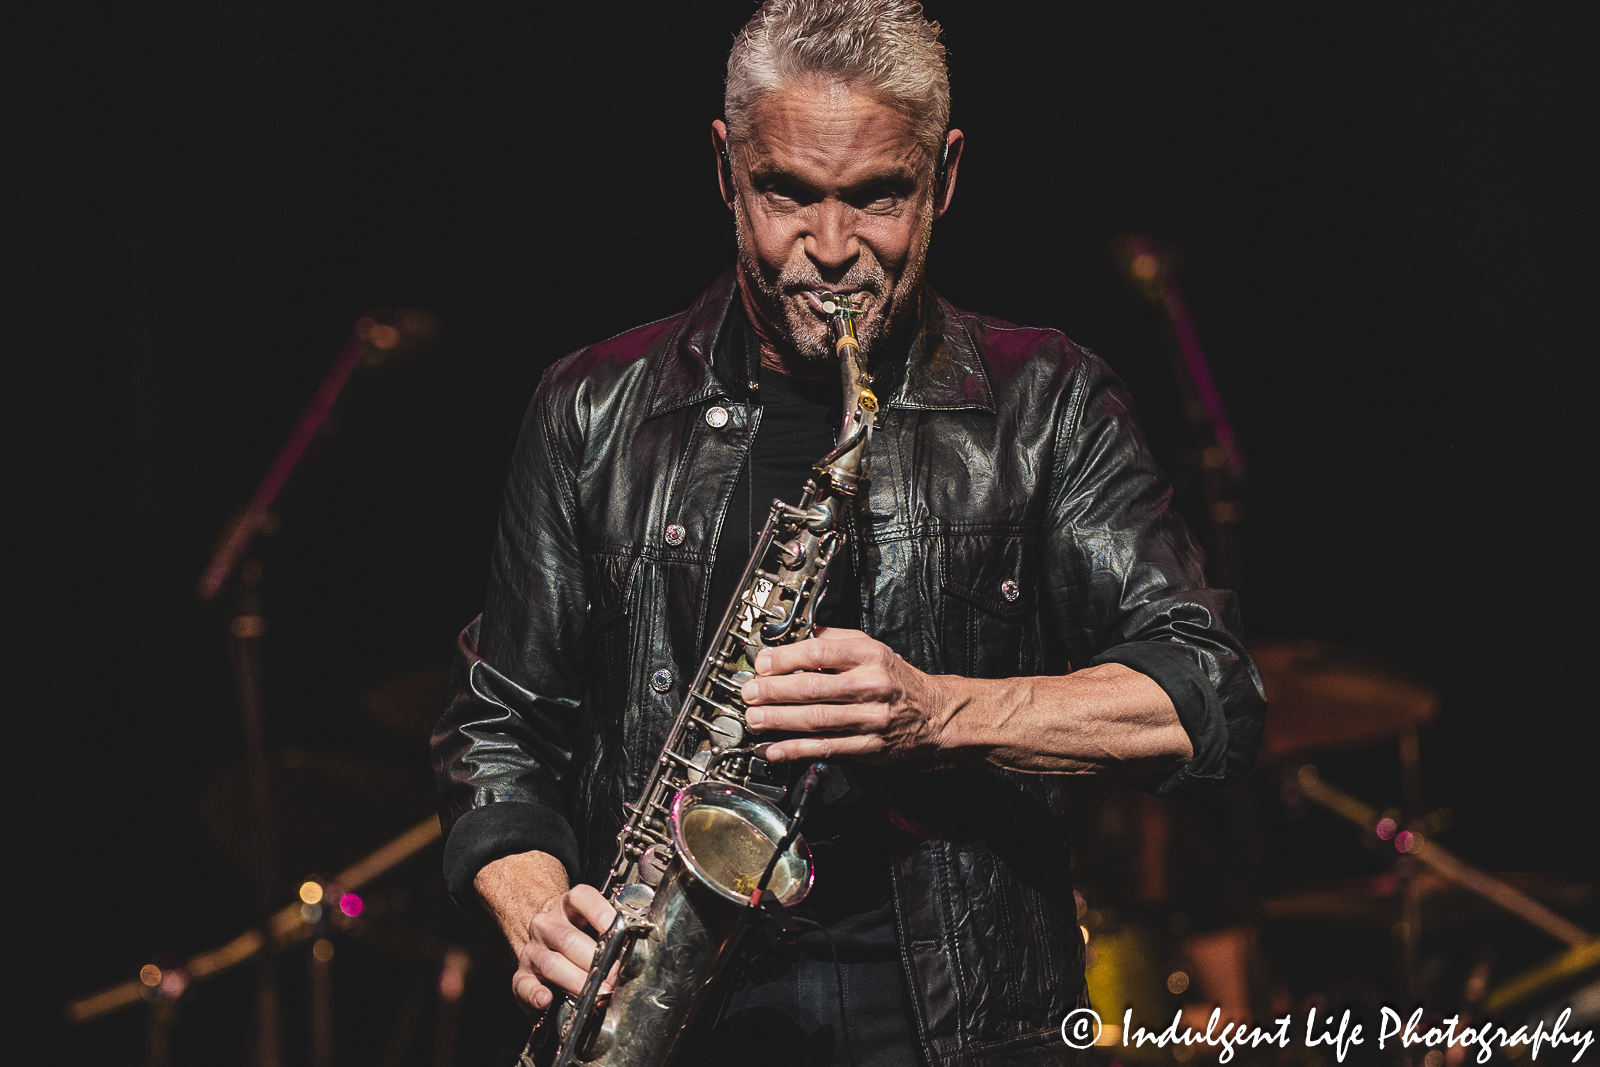 Saxophone player Dave Koz performing live in concert on his "Summer Horns" tour at Kauffman Center for the Performing Arts on July 15, 2023.